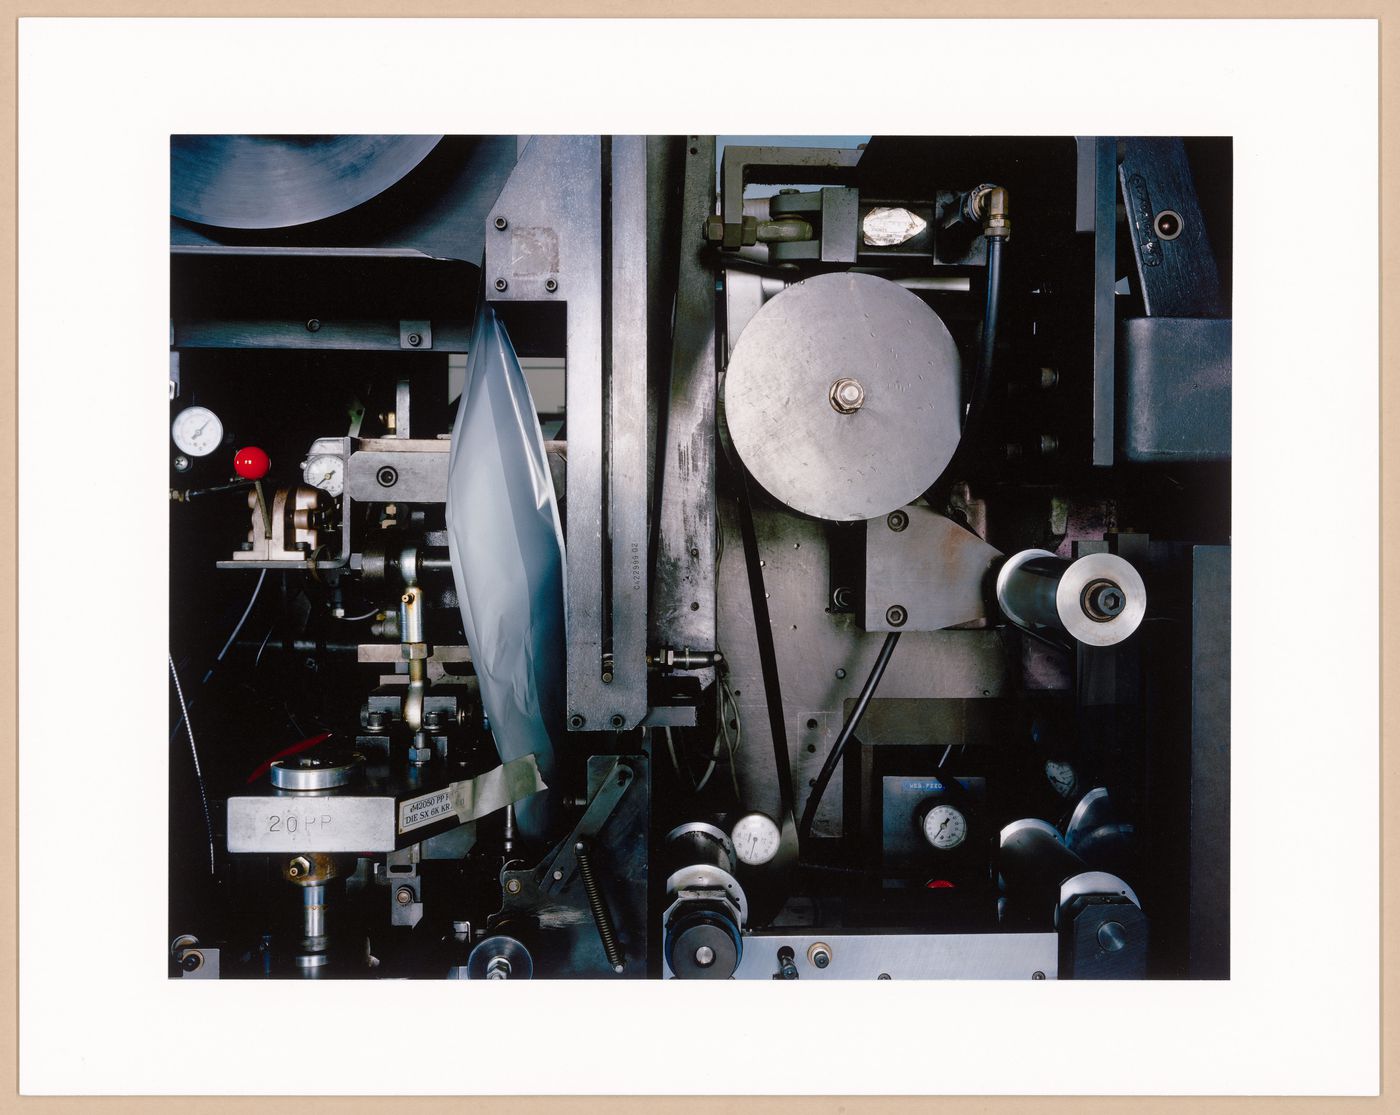 The Disappearance of Darkness: Detail of Machine Used to Create 8" x 10" Polaroid Film, Polaroid, Enschede, The Netherlands